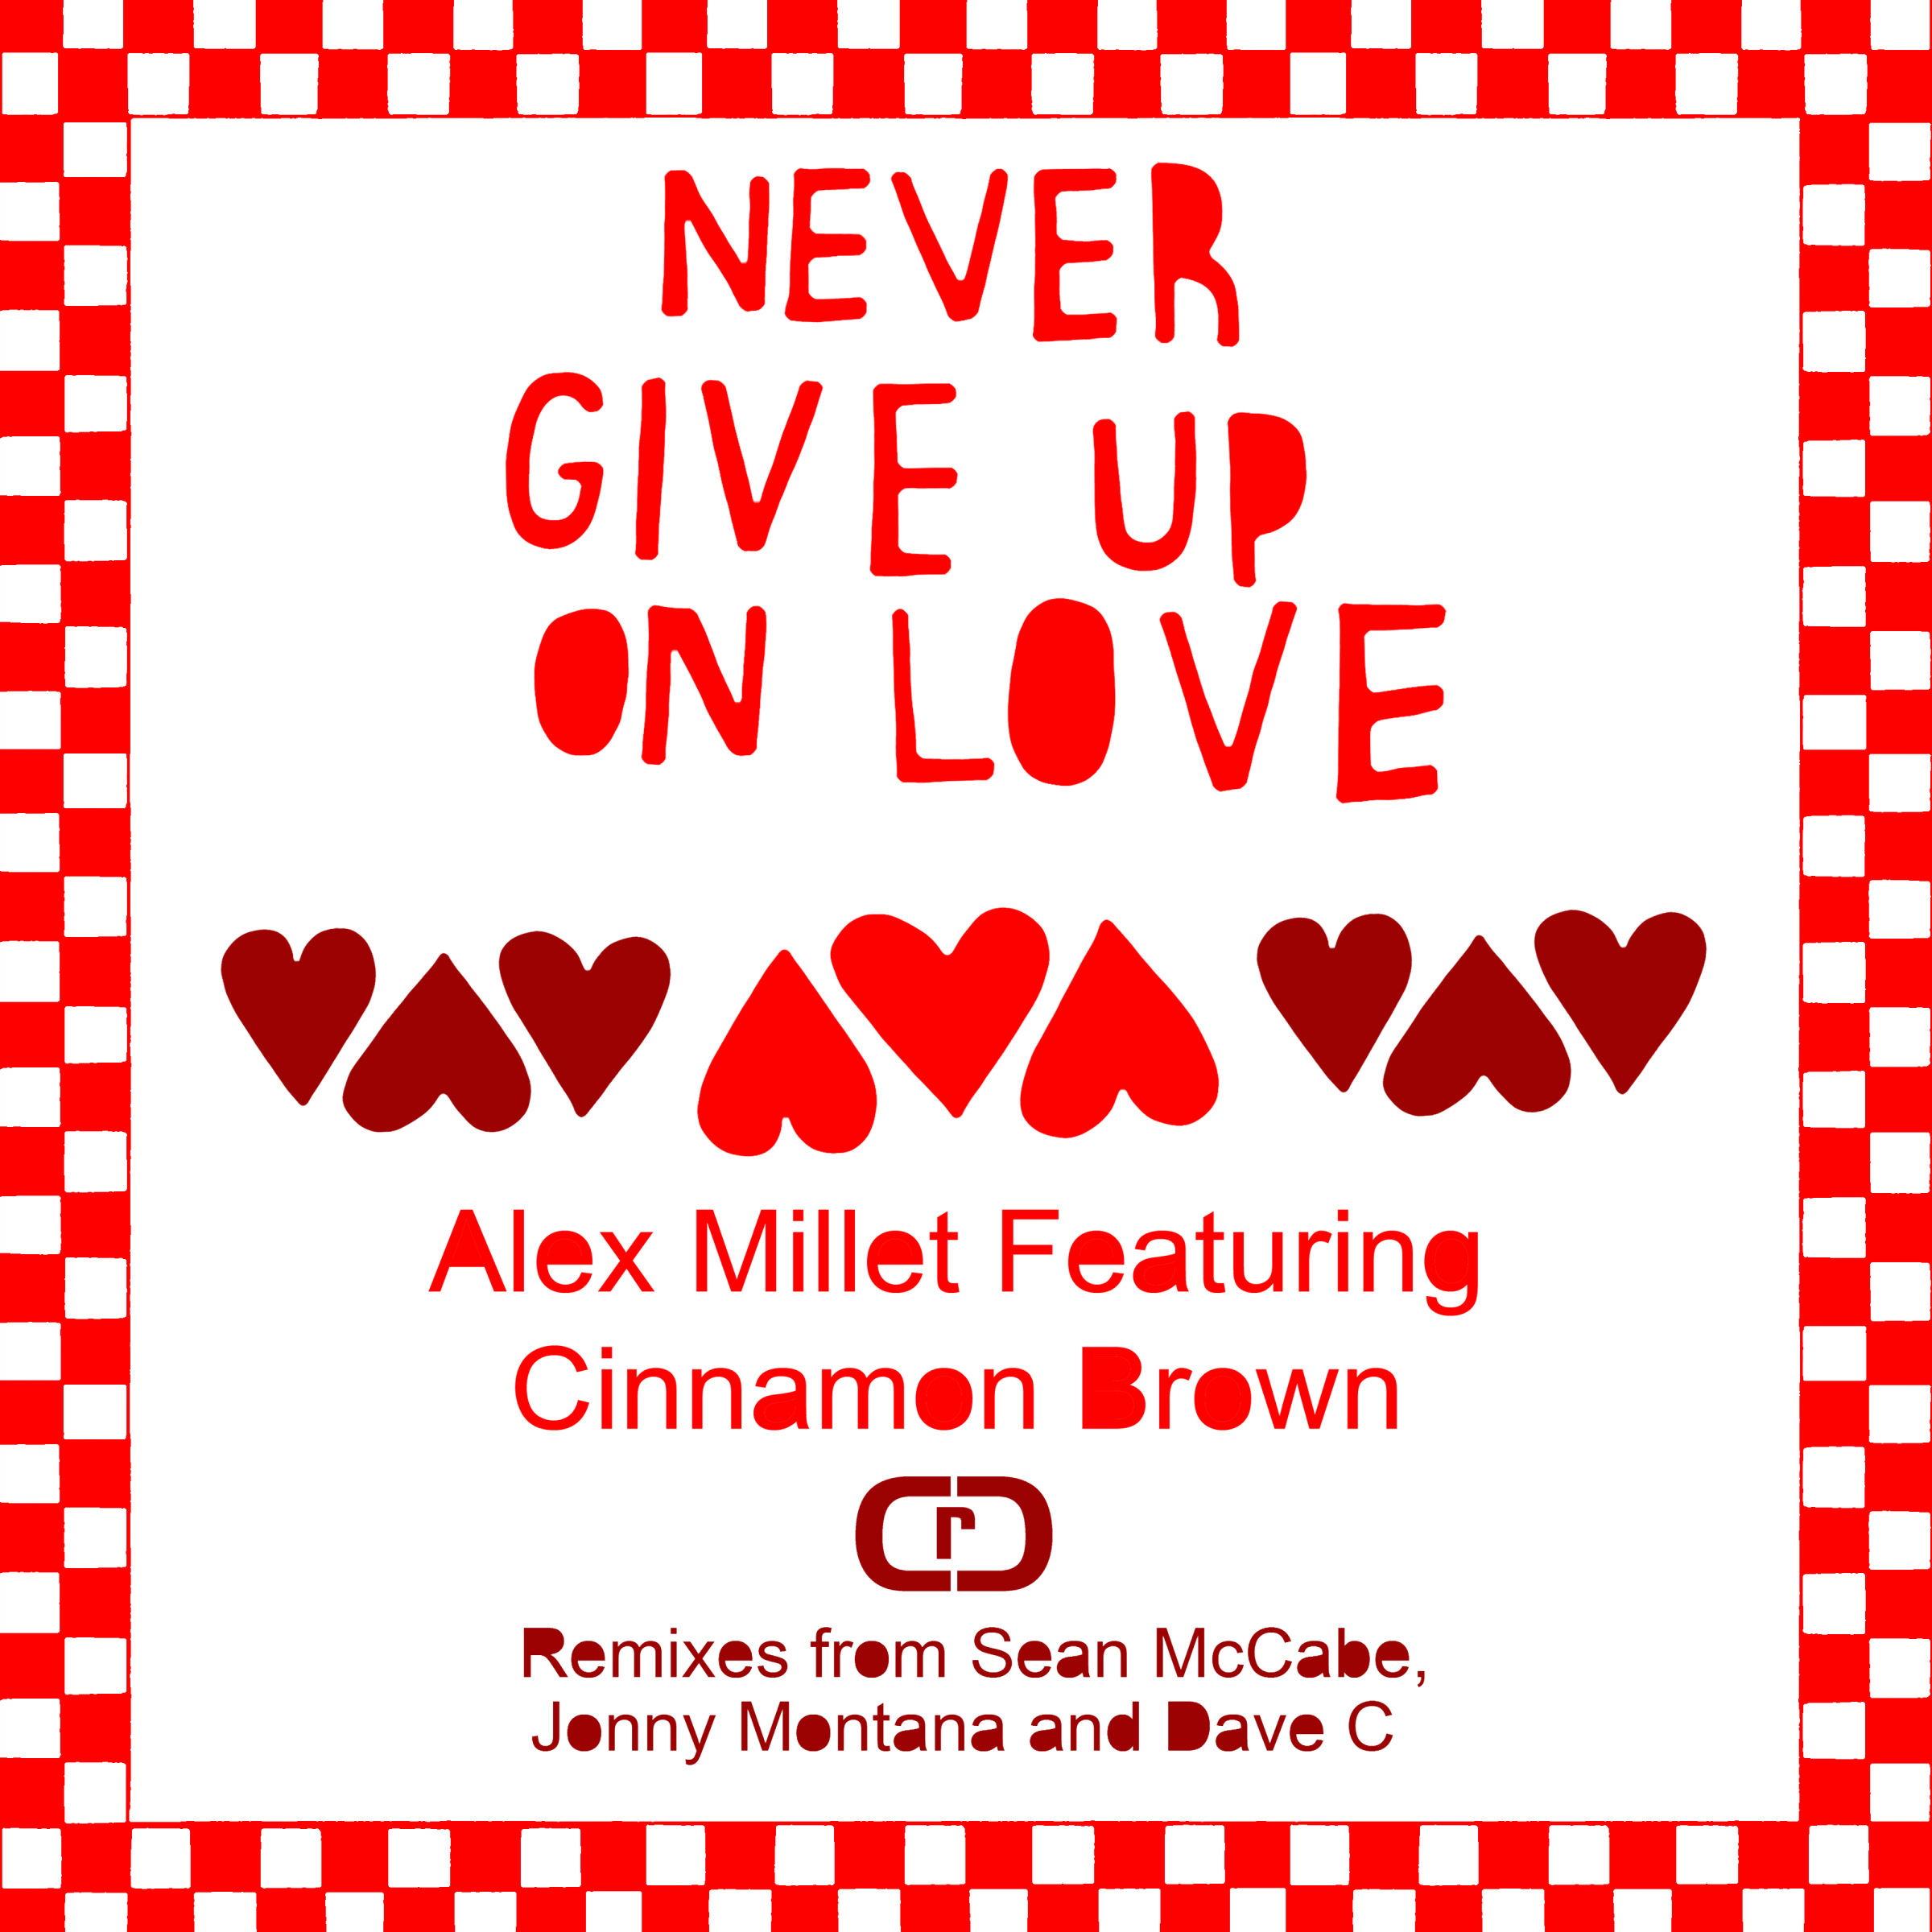 Алекс лове. Alex Love. Never give up песня. Give Love give. Give up on Love.